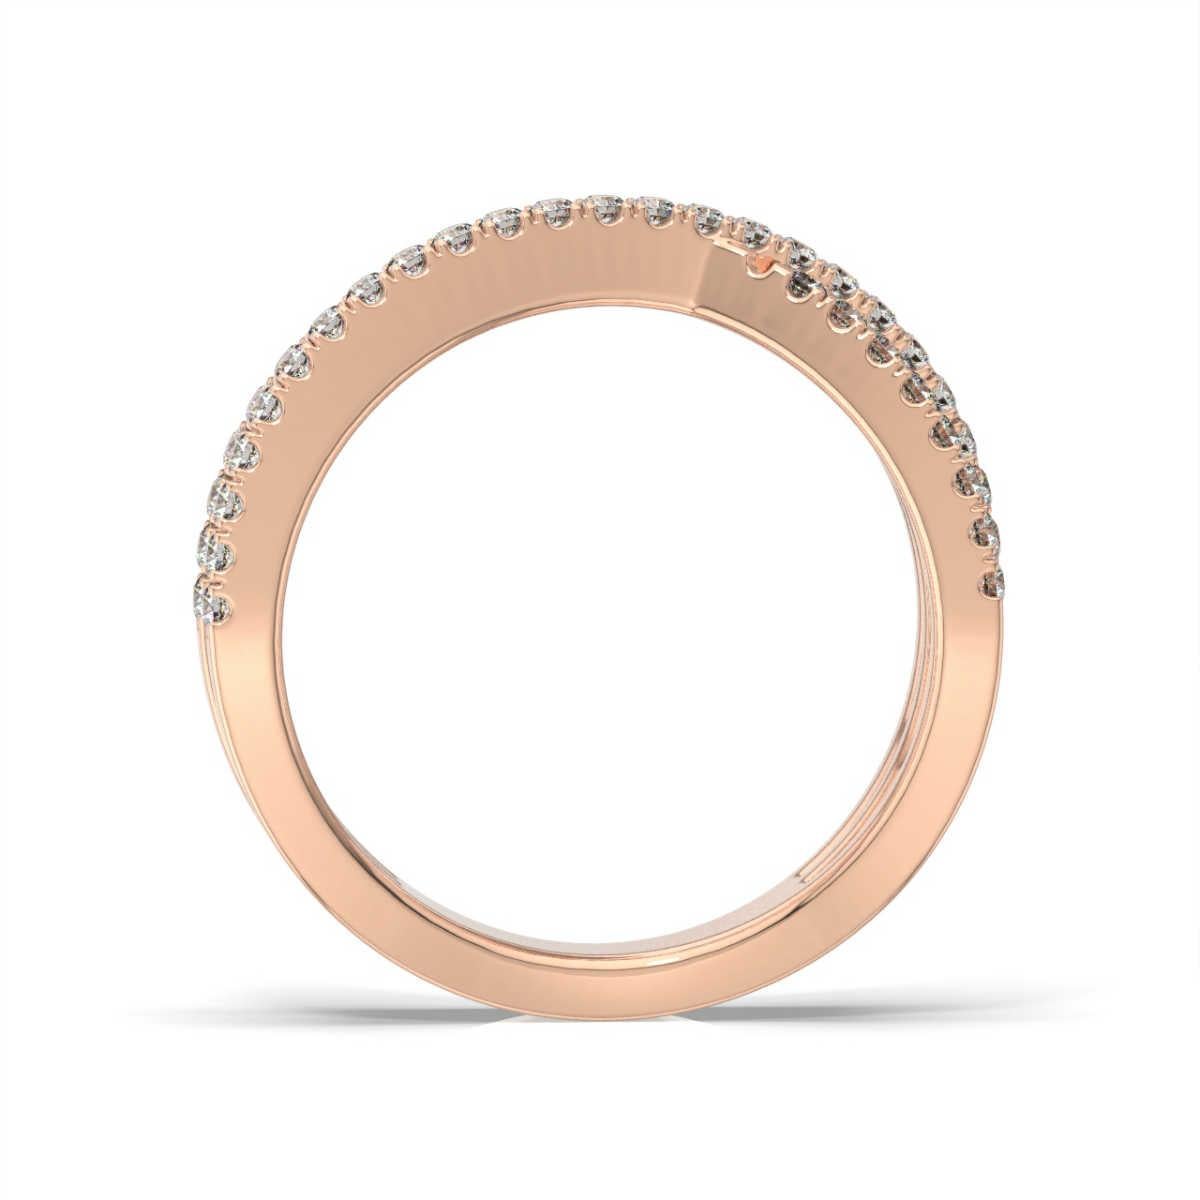 This contemporary, fashionable ring features three rows of Interweave Micro Prongs set diamonds.

Product details: 

Center Gemstone Color: WHITE
Side Gemstone Type: NATURAL DIAMOND
Side Gemstone Shape: ROUND
Metal: 18K Rose Gold
Metal Weight: